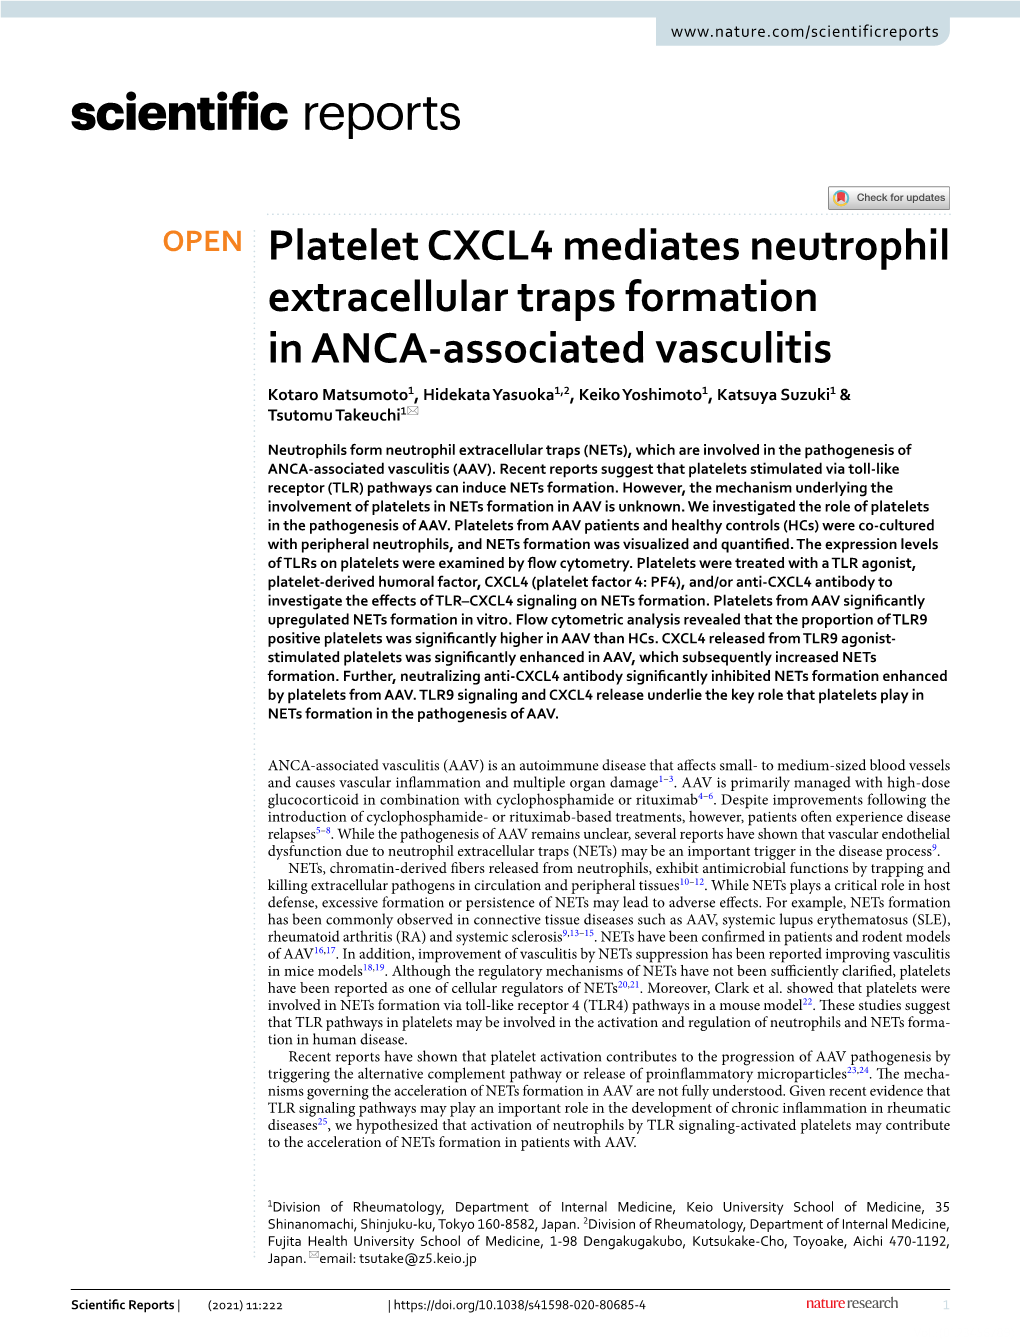 Platelet CXCL4 Mediates Neutrophil Extracellular Traps Formation In